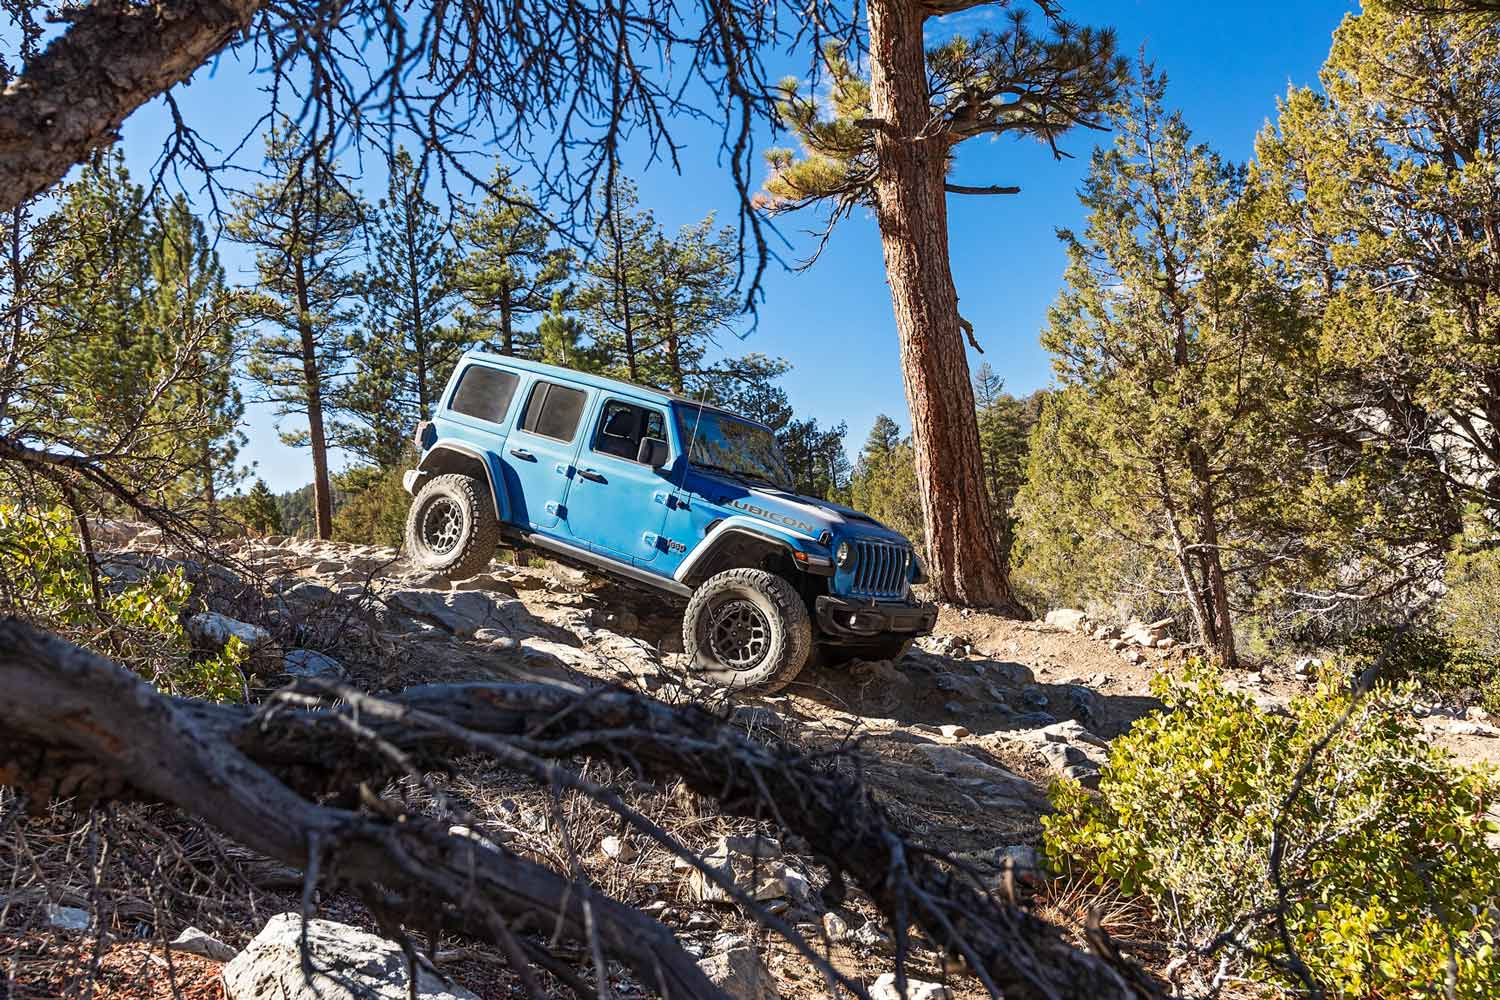 2022 Jeep Wrangler Unlimited in blue driving down steep rocky incline in forest.